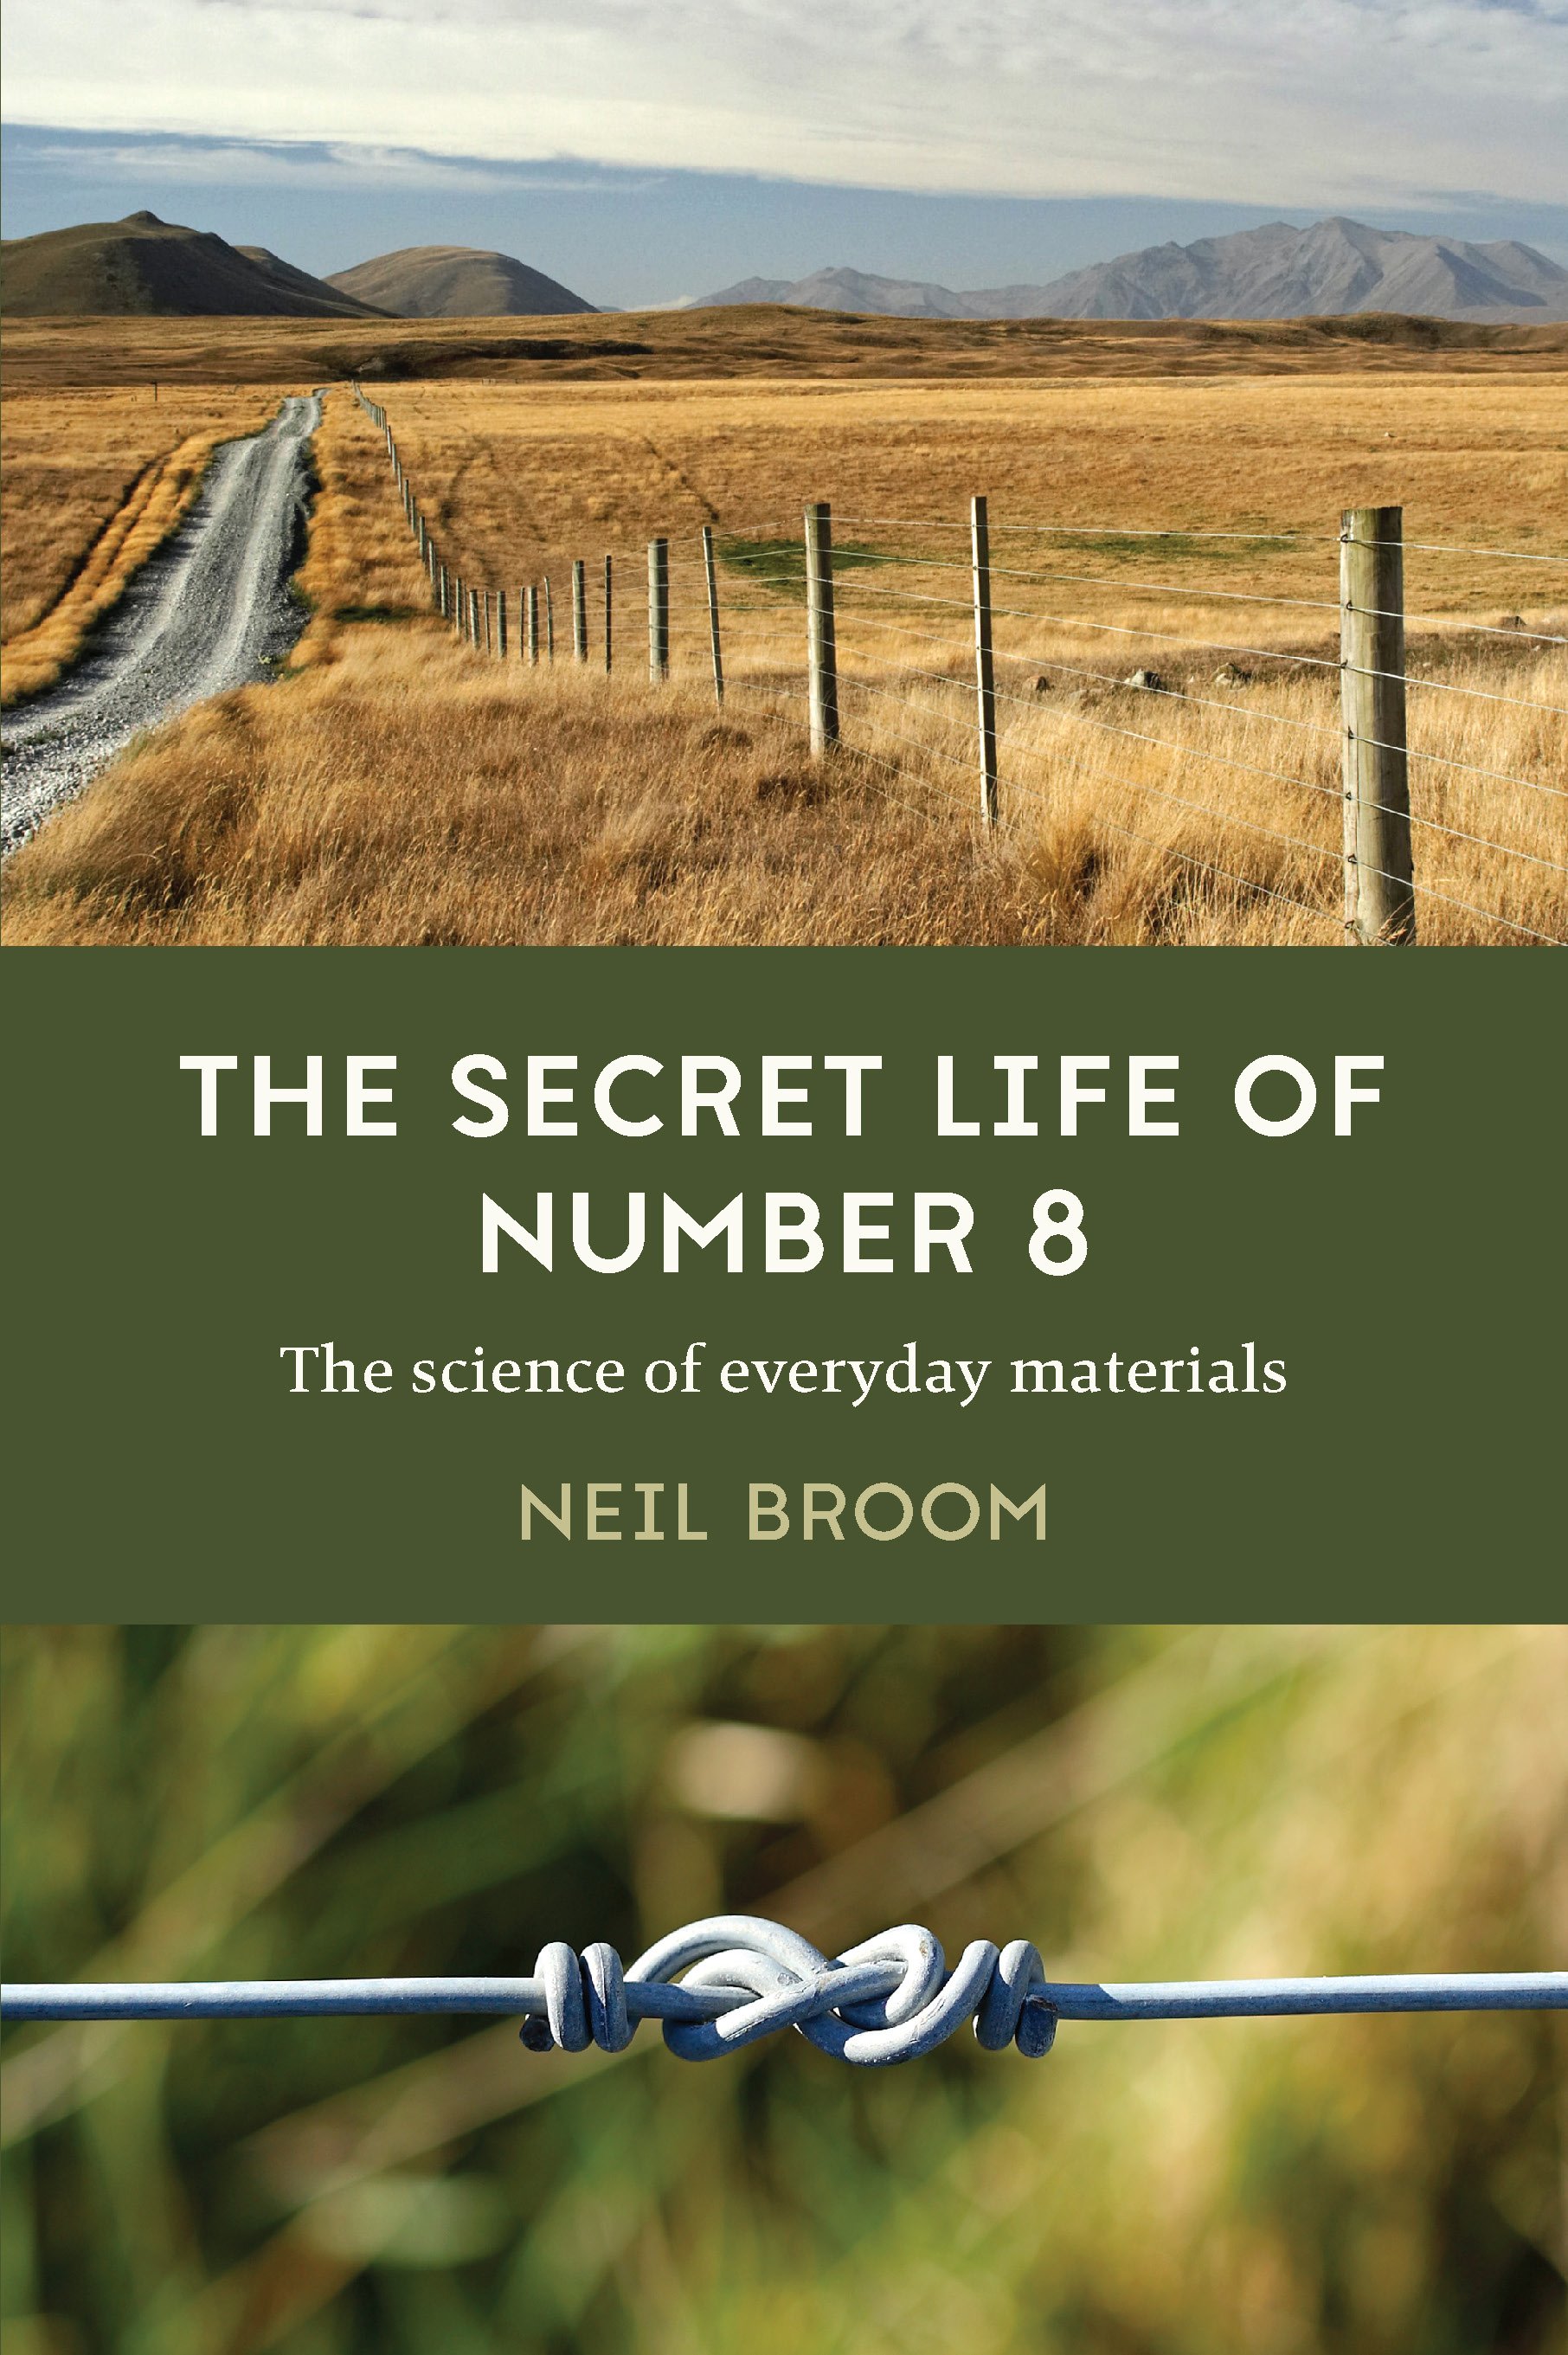  ‘The Secret Life of Number 8’ takes the reader into the heart of a universe in miniature, one that reveals the striking order, complexity, and elegance of the materials that are part of everyday life. This book will appeal to anyone, irrespective of